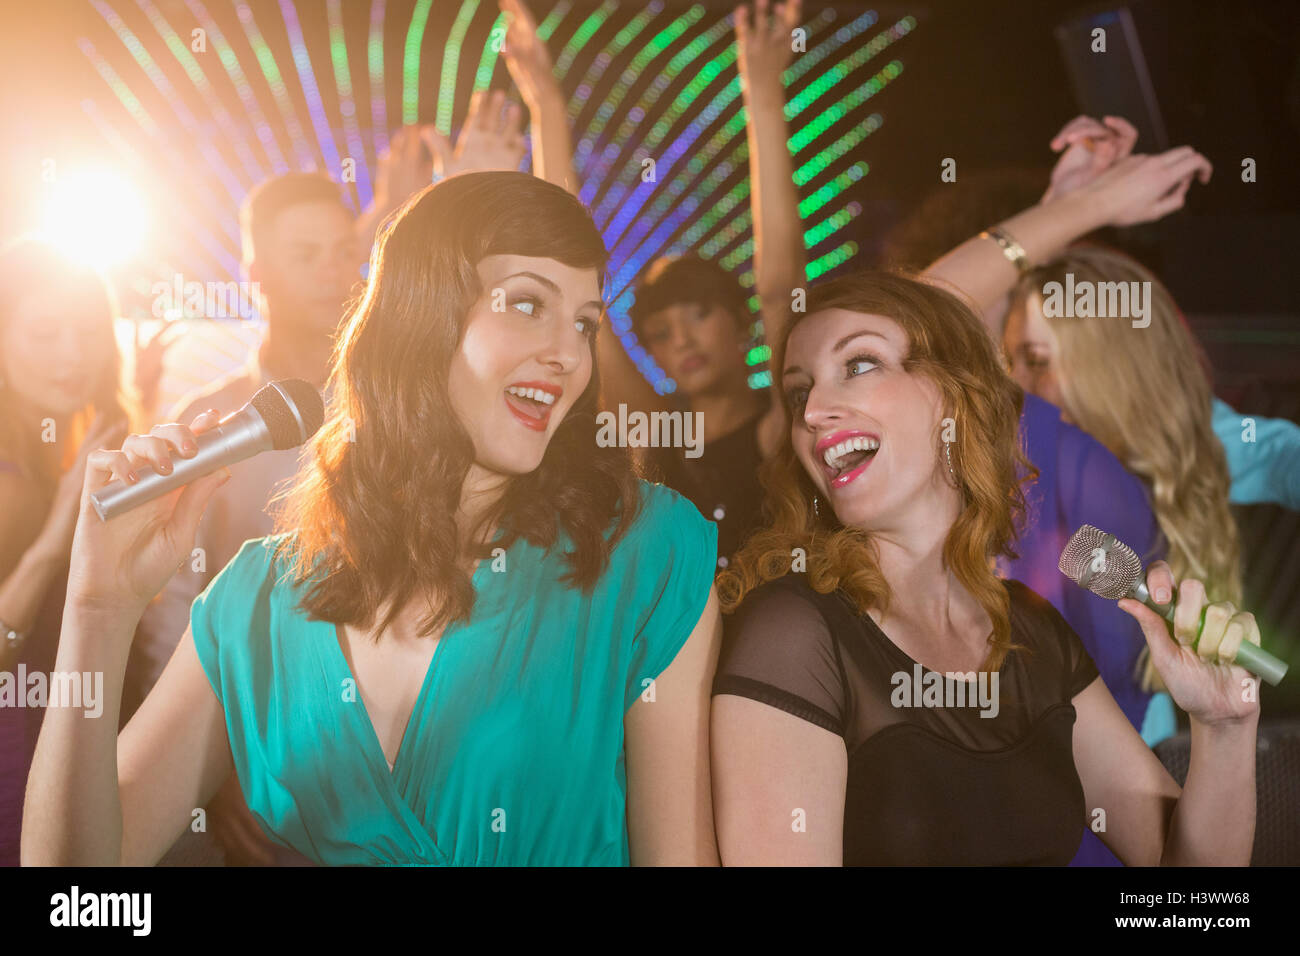 Two beautiful women singing song together Stock Photo